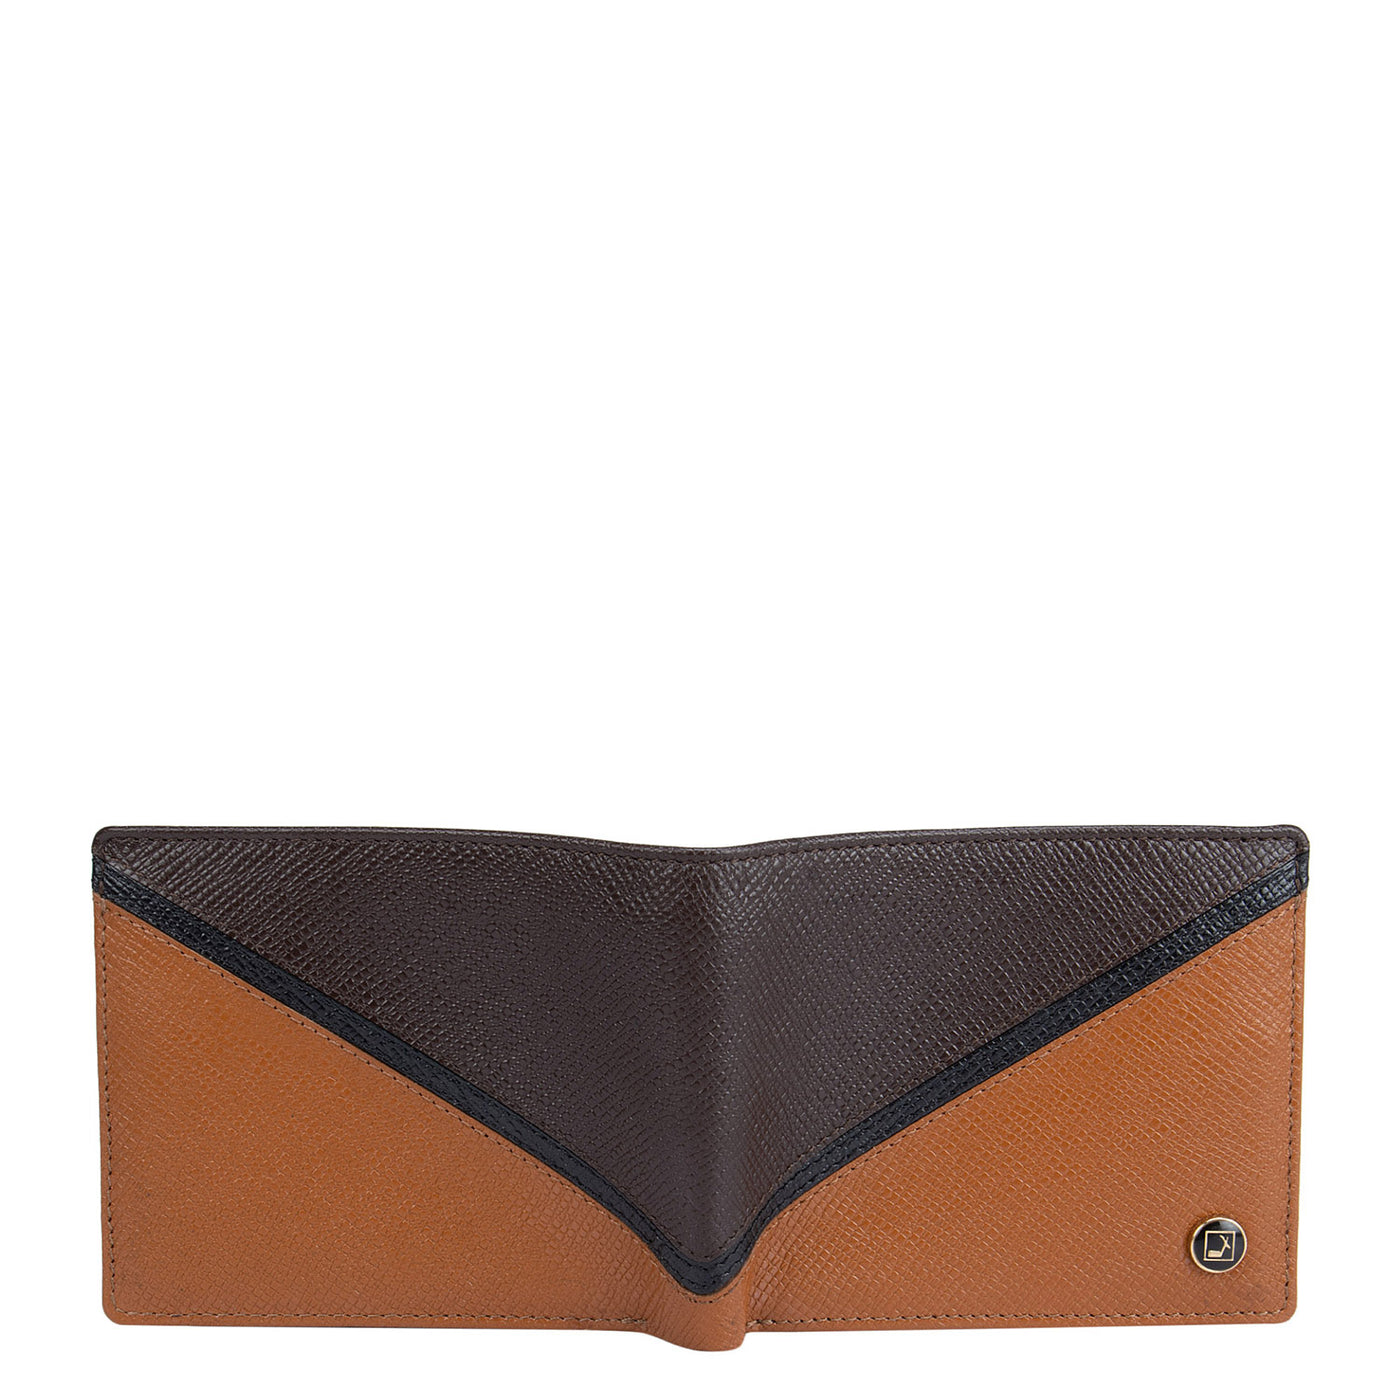 Franzy Leather Mens Wallet - Chocolate & Cognac